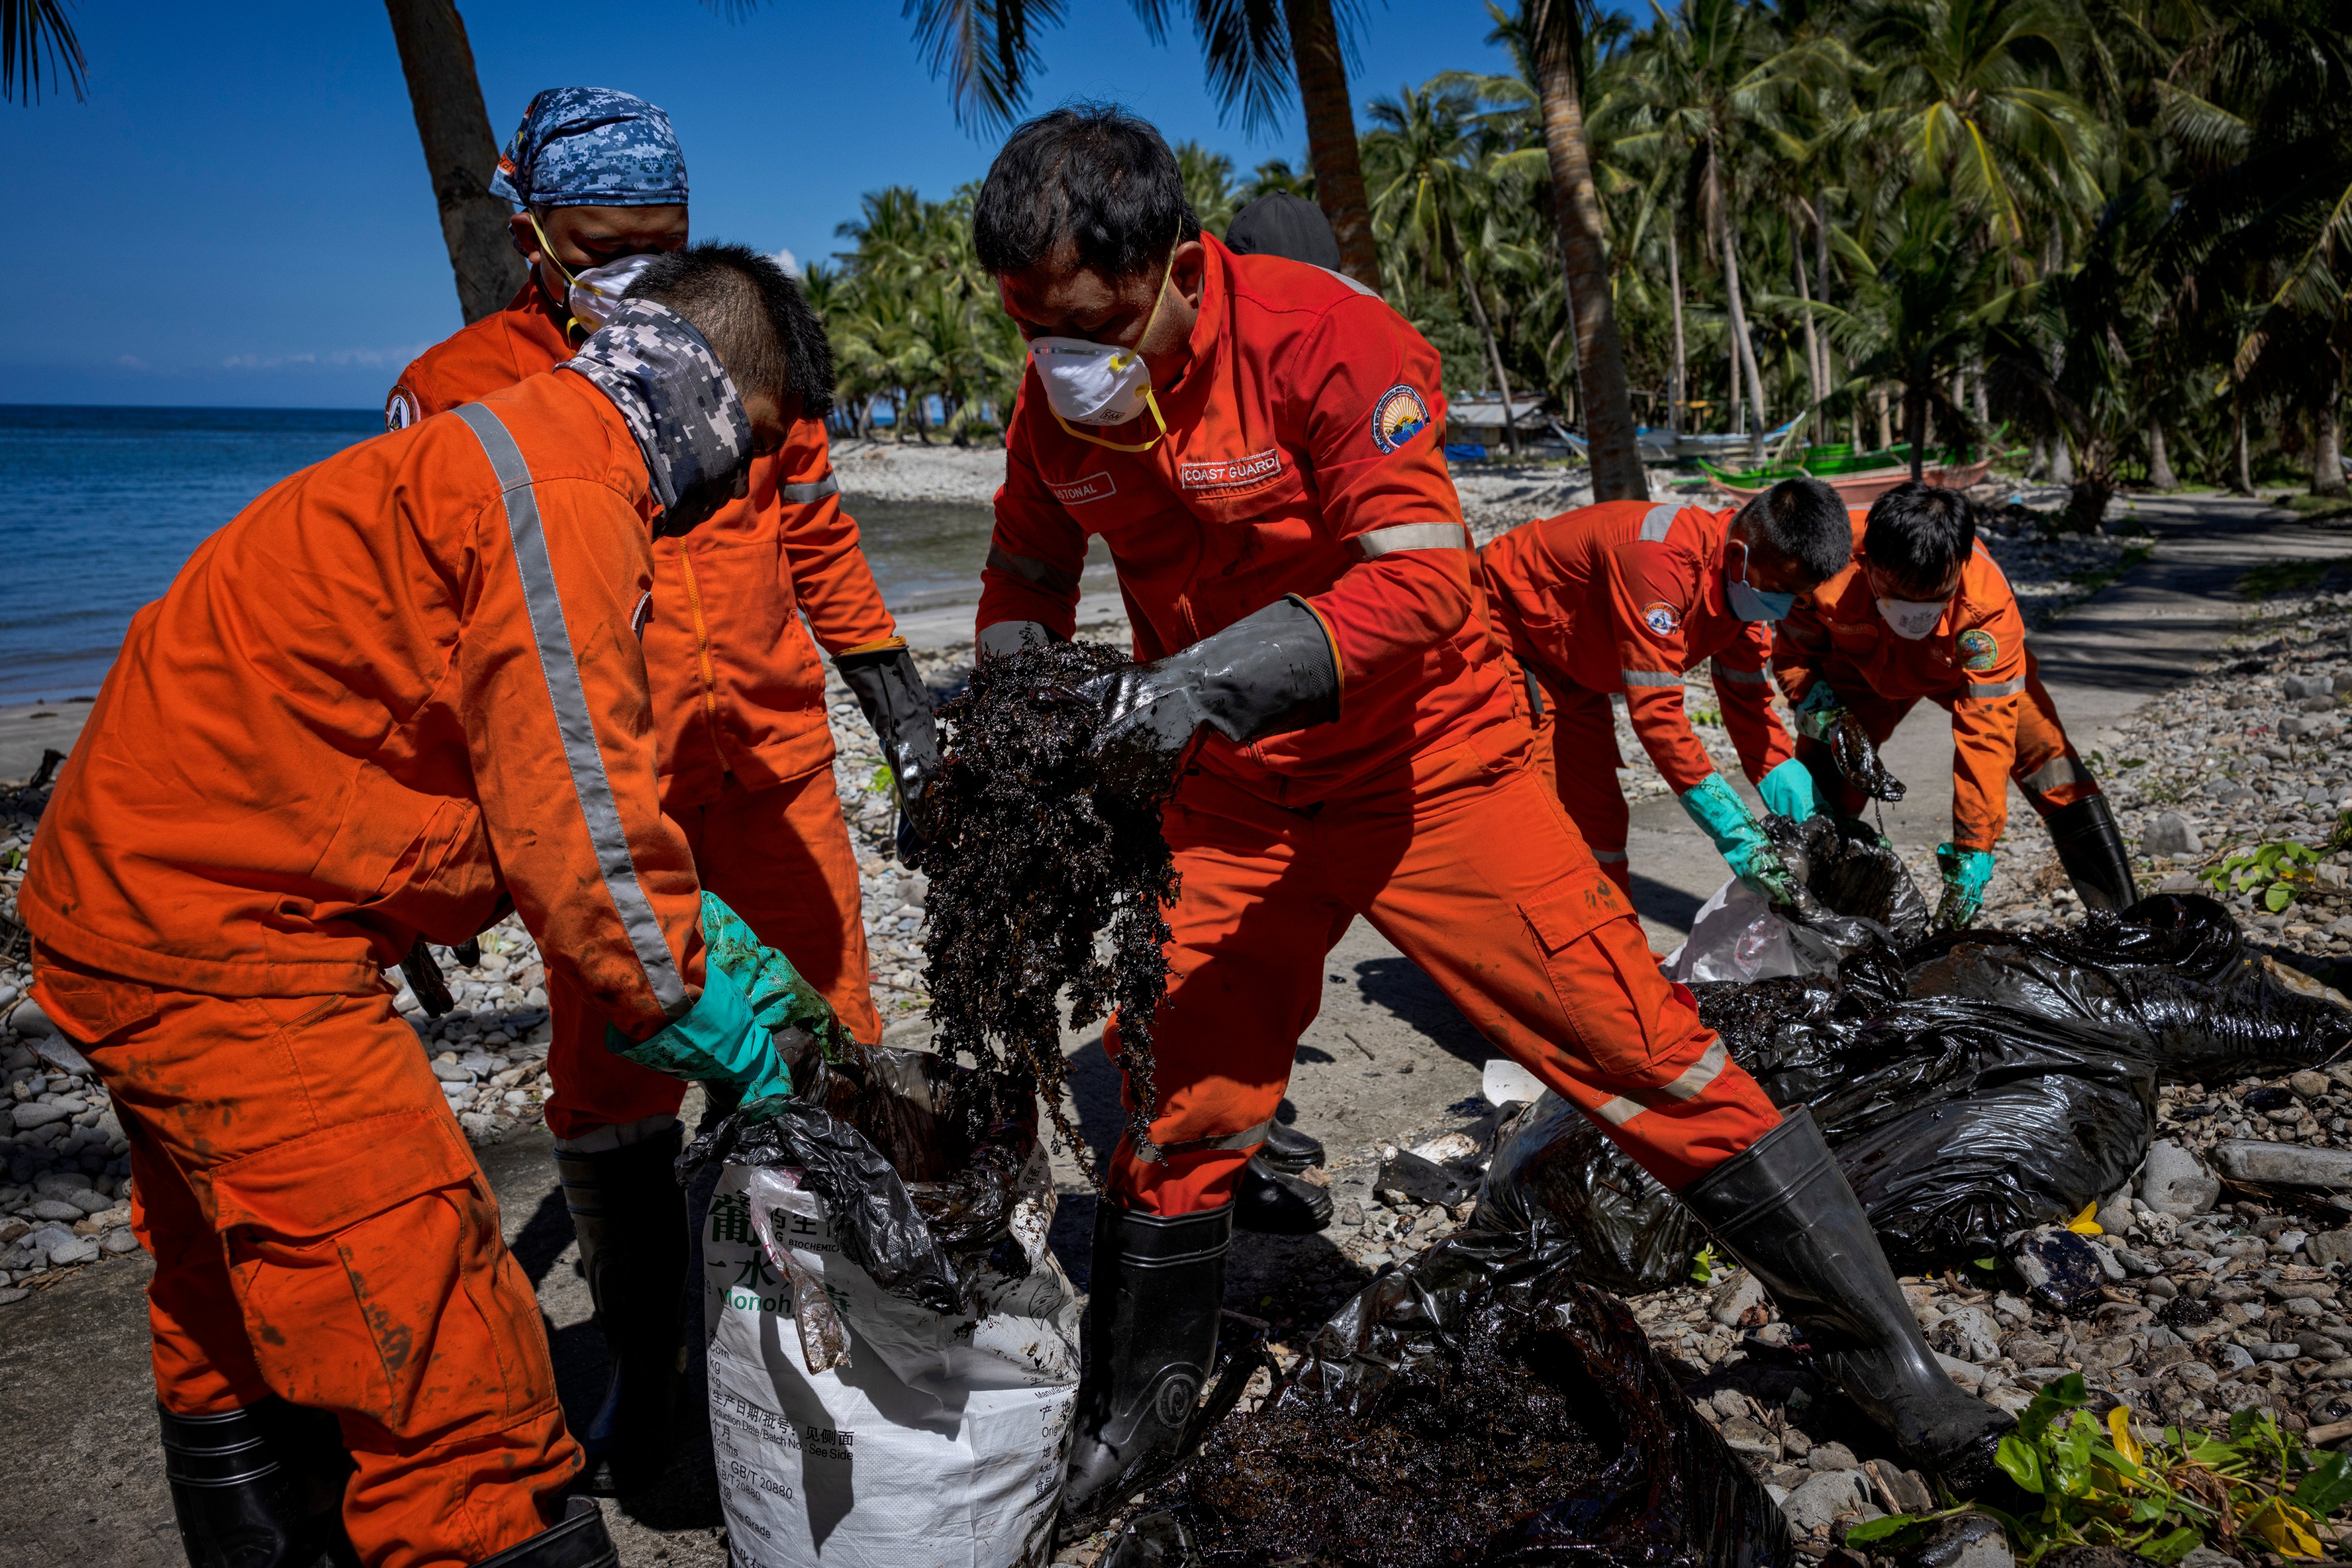 Philippine coast guard personnel clean up oil slick that washed ashore in Pola, Oriental Mindoro, March 08, 2023. (Ezra Acayan/Getty Images)